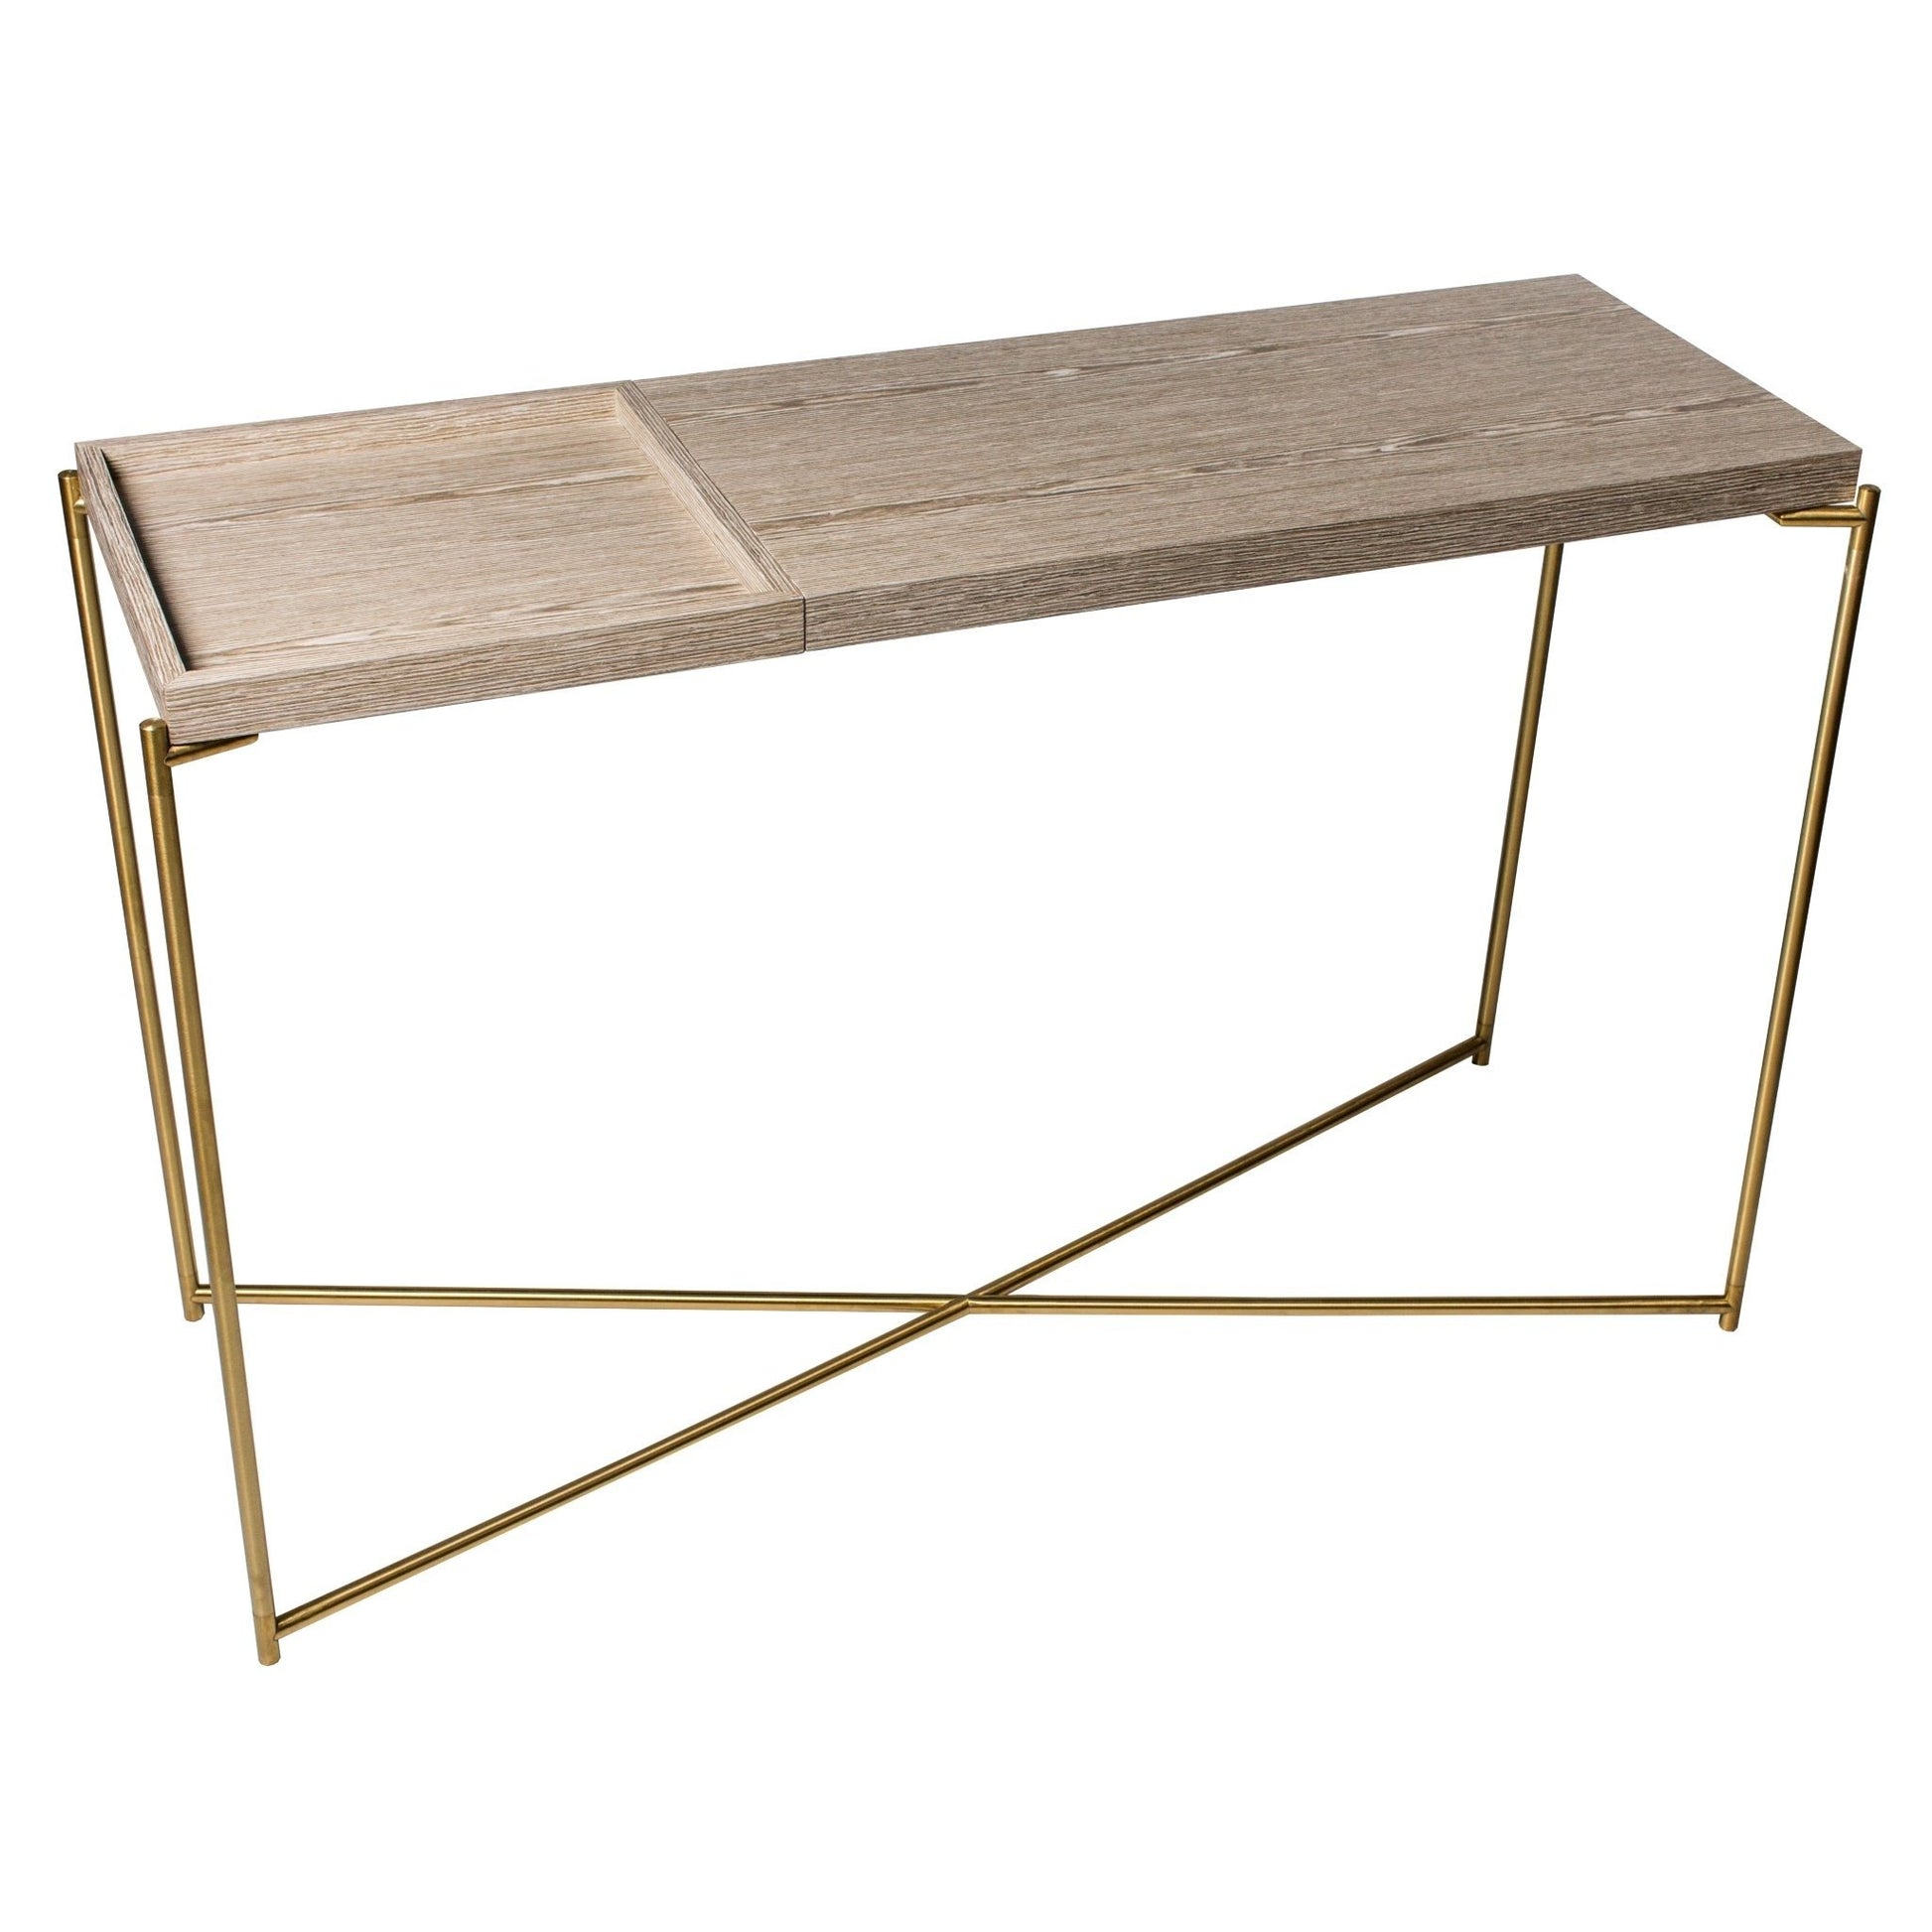 Iris Large Console Table - Weathered Oak Plain Top & Small Tray, Brass Frame